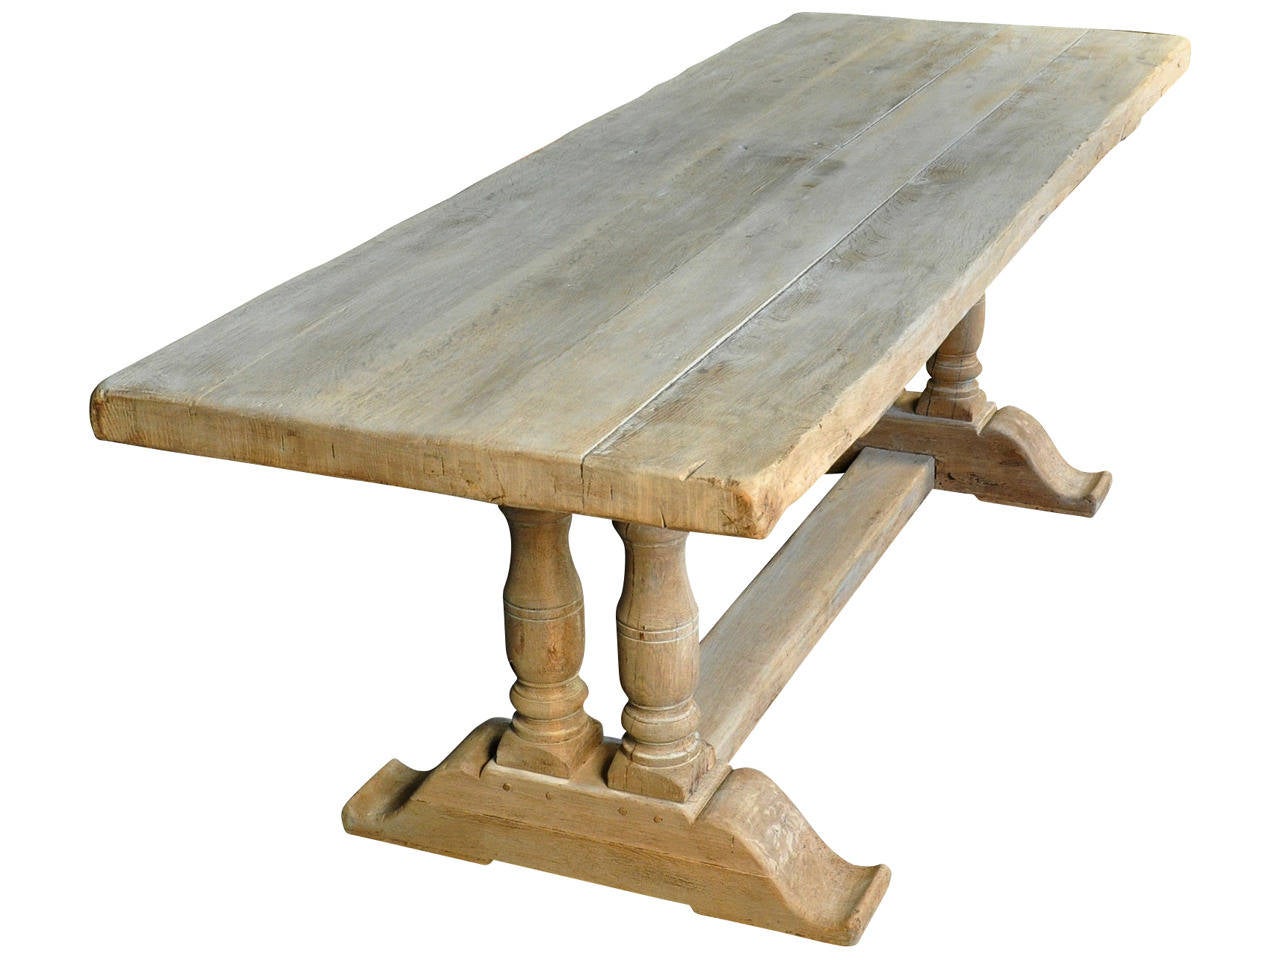 French 19th century farm table - trestle table soundly constructed in bleached oak.  Wonderful not only as a dining table, but would serve beautifully as a large sofa or console table as well.